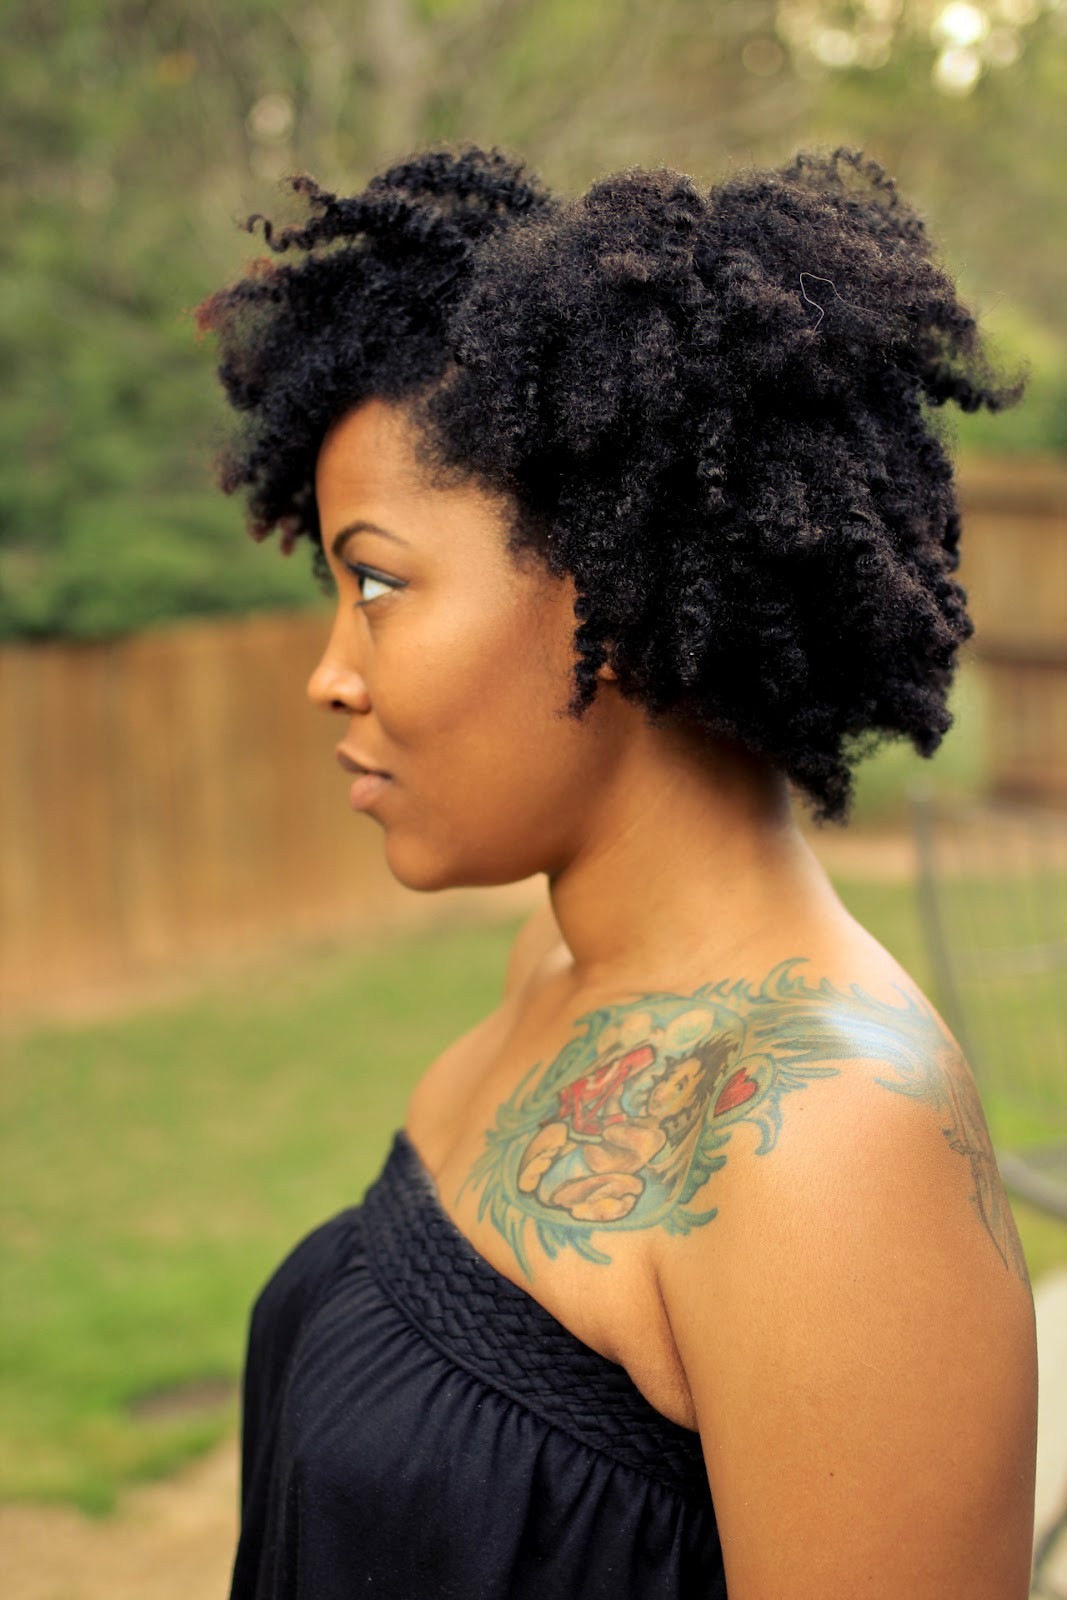 Hairstyles Short Natural Hair
 20 Natural Hairstyles At Every Stage MagMent